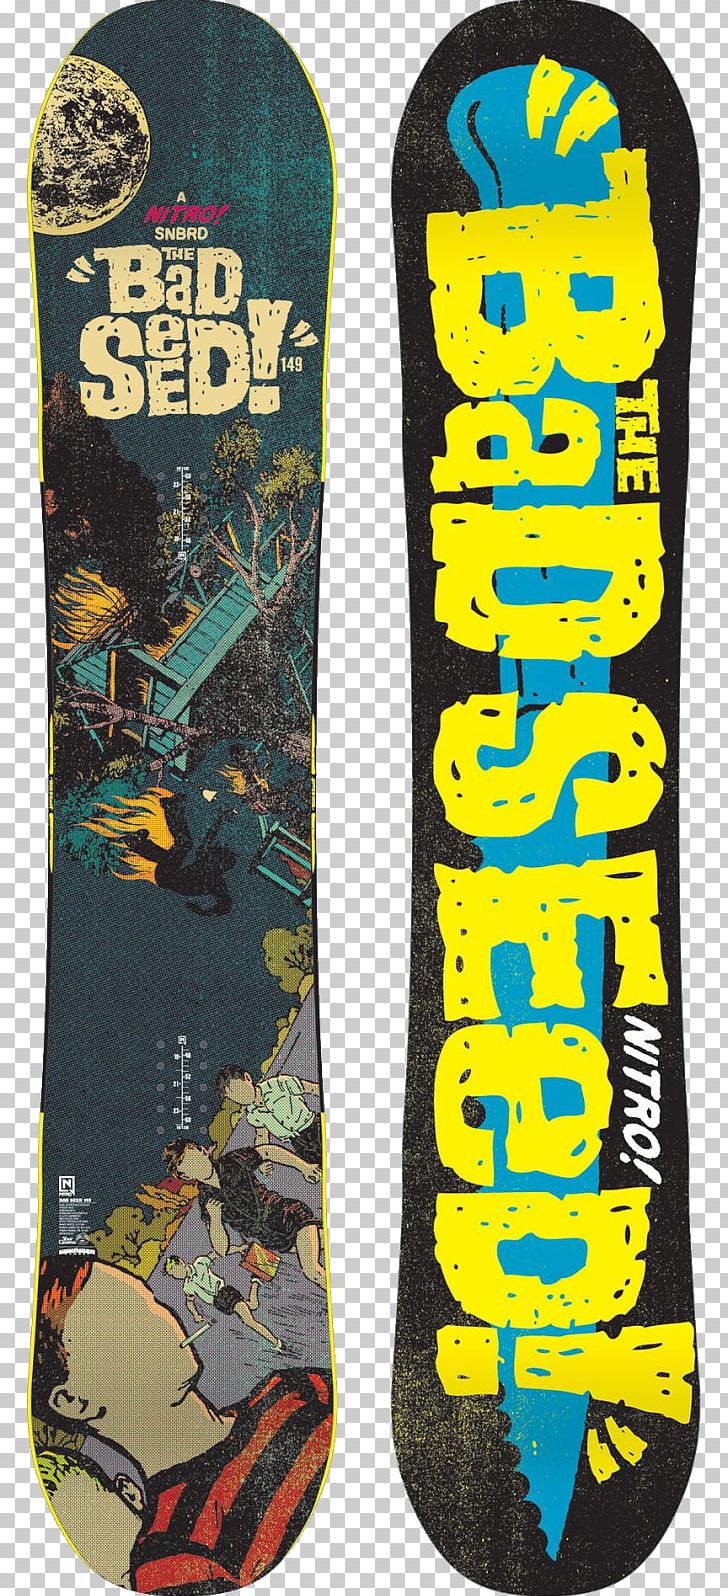 Nitro Snowboards Sporting Goods Portable Network Graphics Text PNG, Clipart, 2019, Guitar, Mountain Bike, Nitro Snowboards, Outerwear Free PNG Download